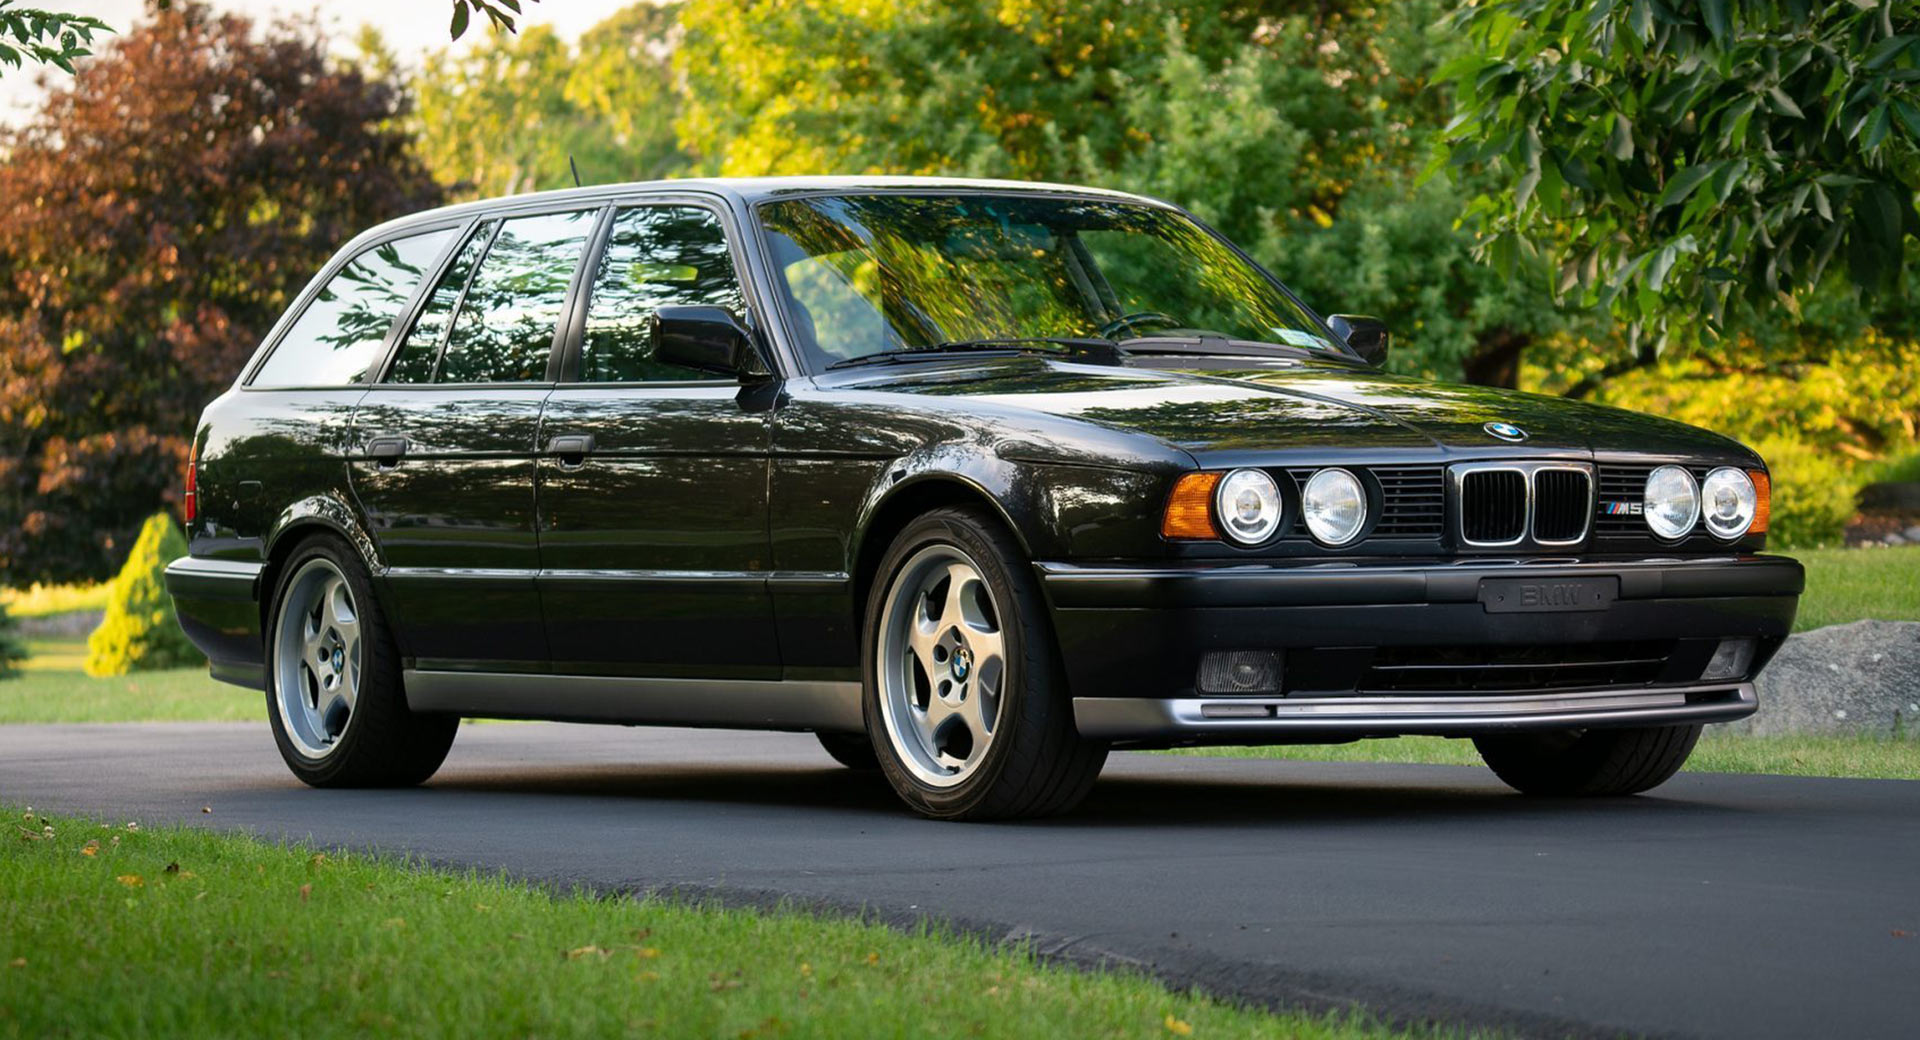 BMW E34 M5 Touring Is An Epic Family Car From The 1990s And It's For Sale  In The USA